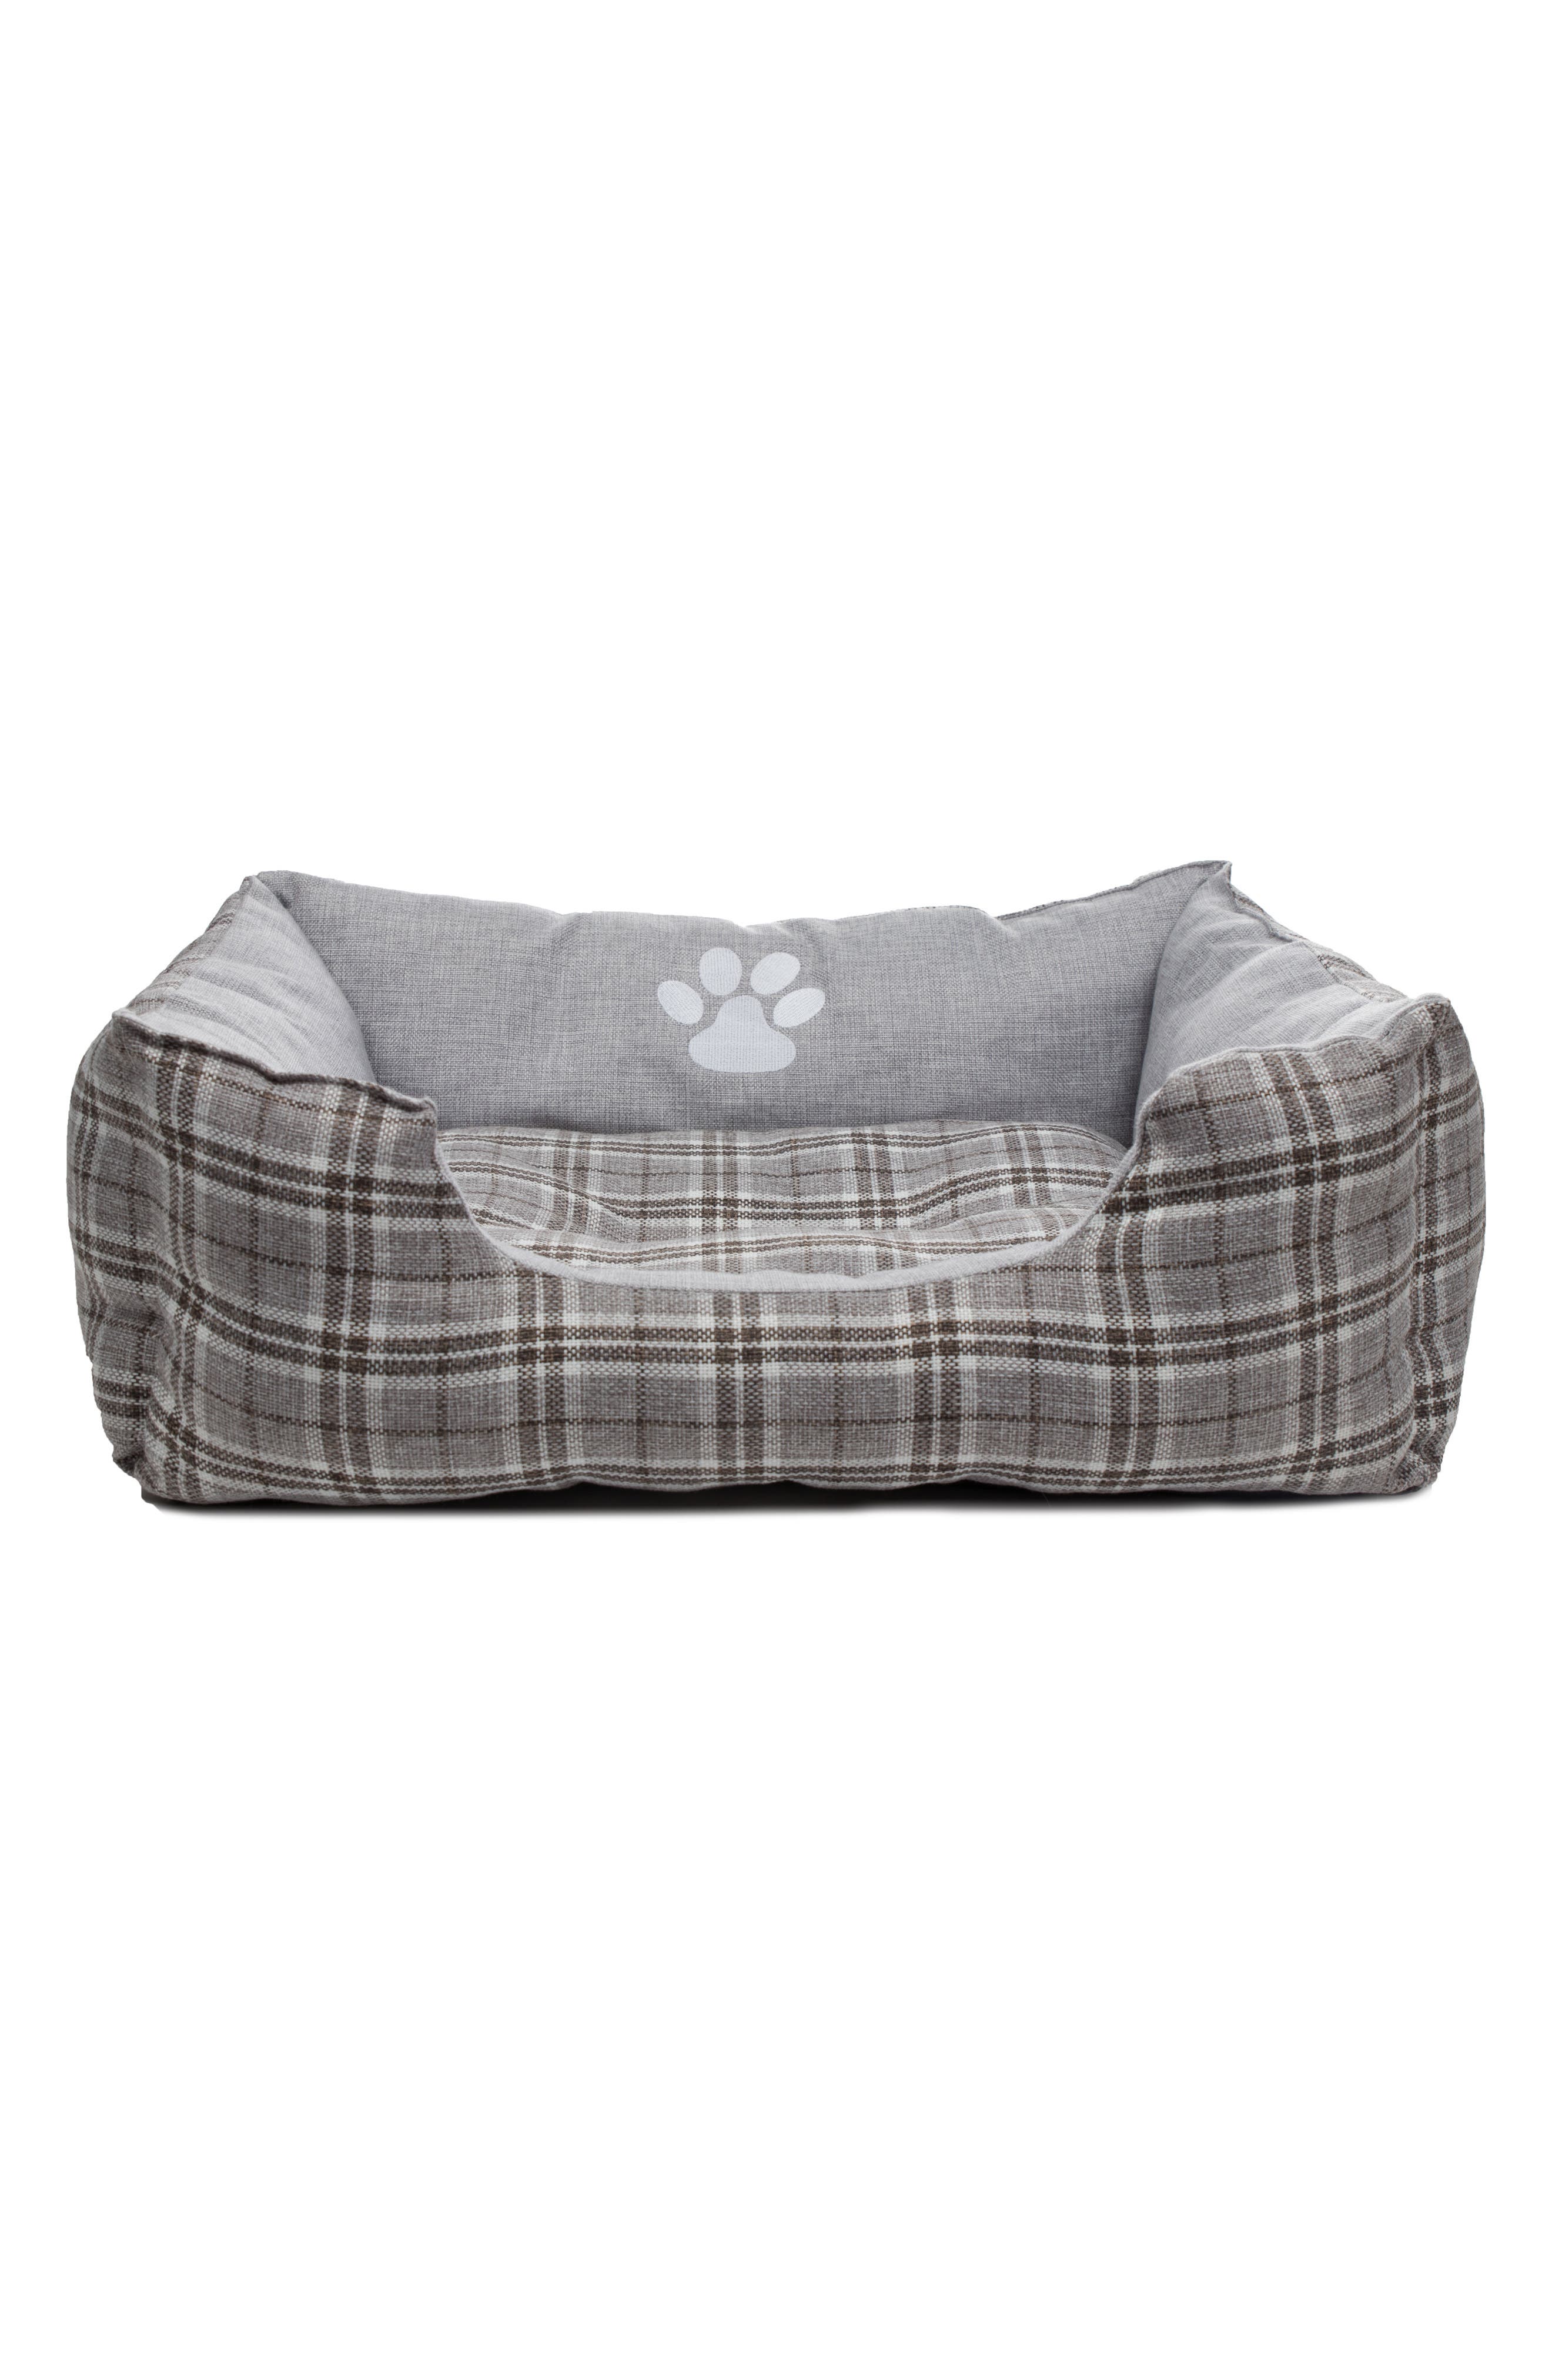 Duck River Textile Harlee Large Square Pet Bed In Grey